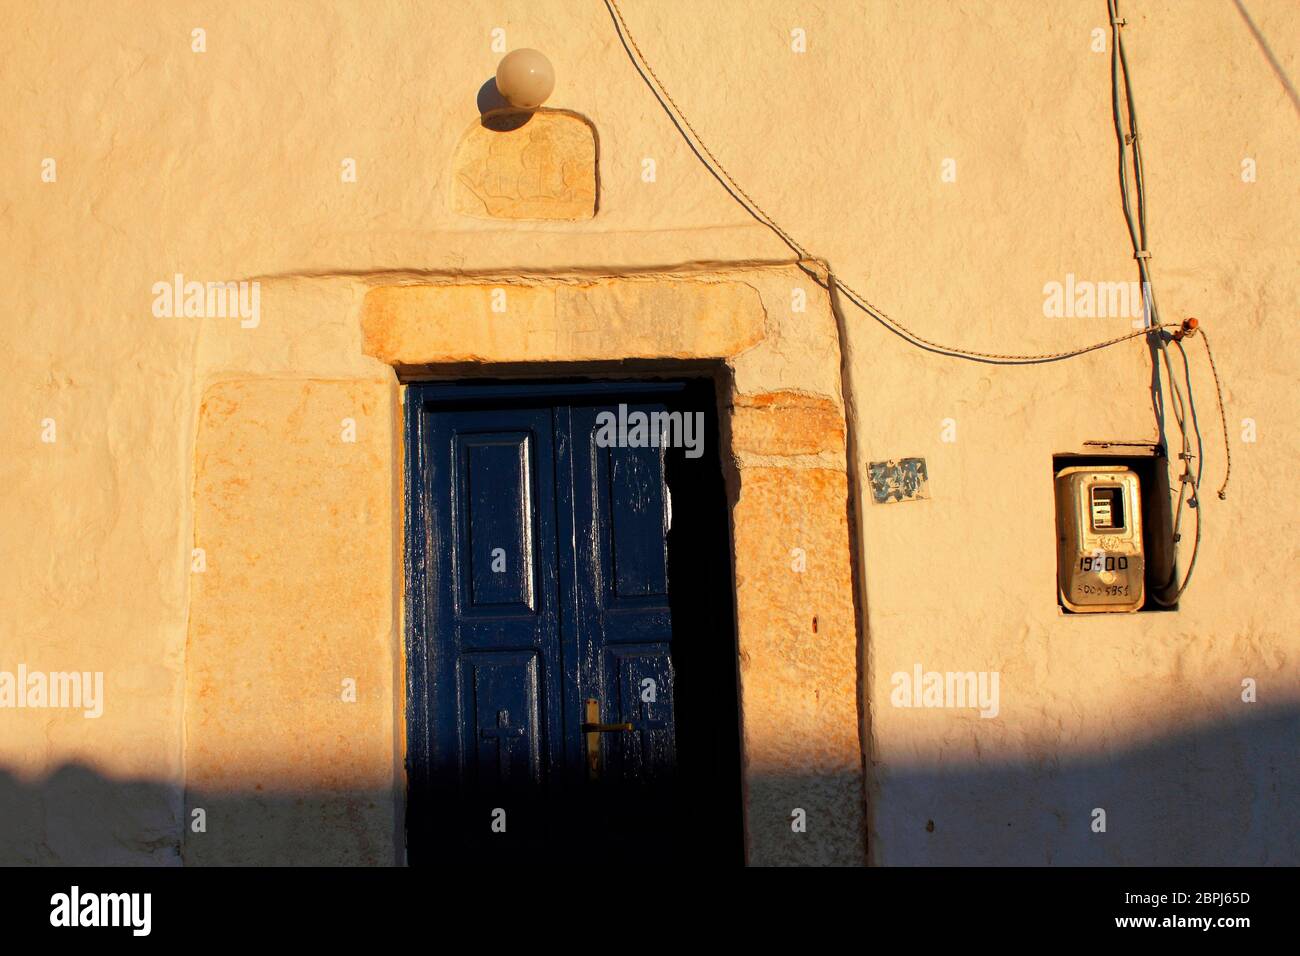 Greece, Serifos island, the door of an old house at Chora with electric meter box in the background. Stock Photo